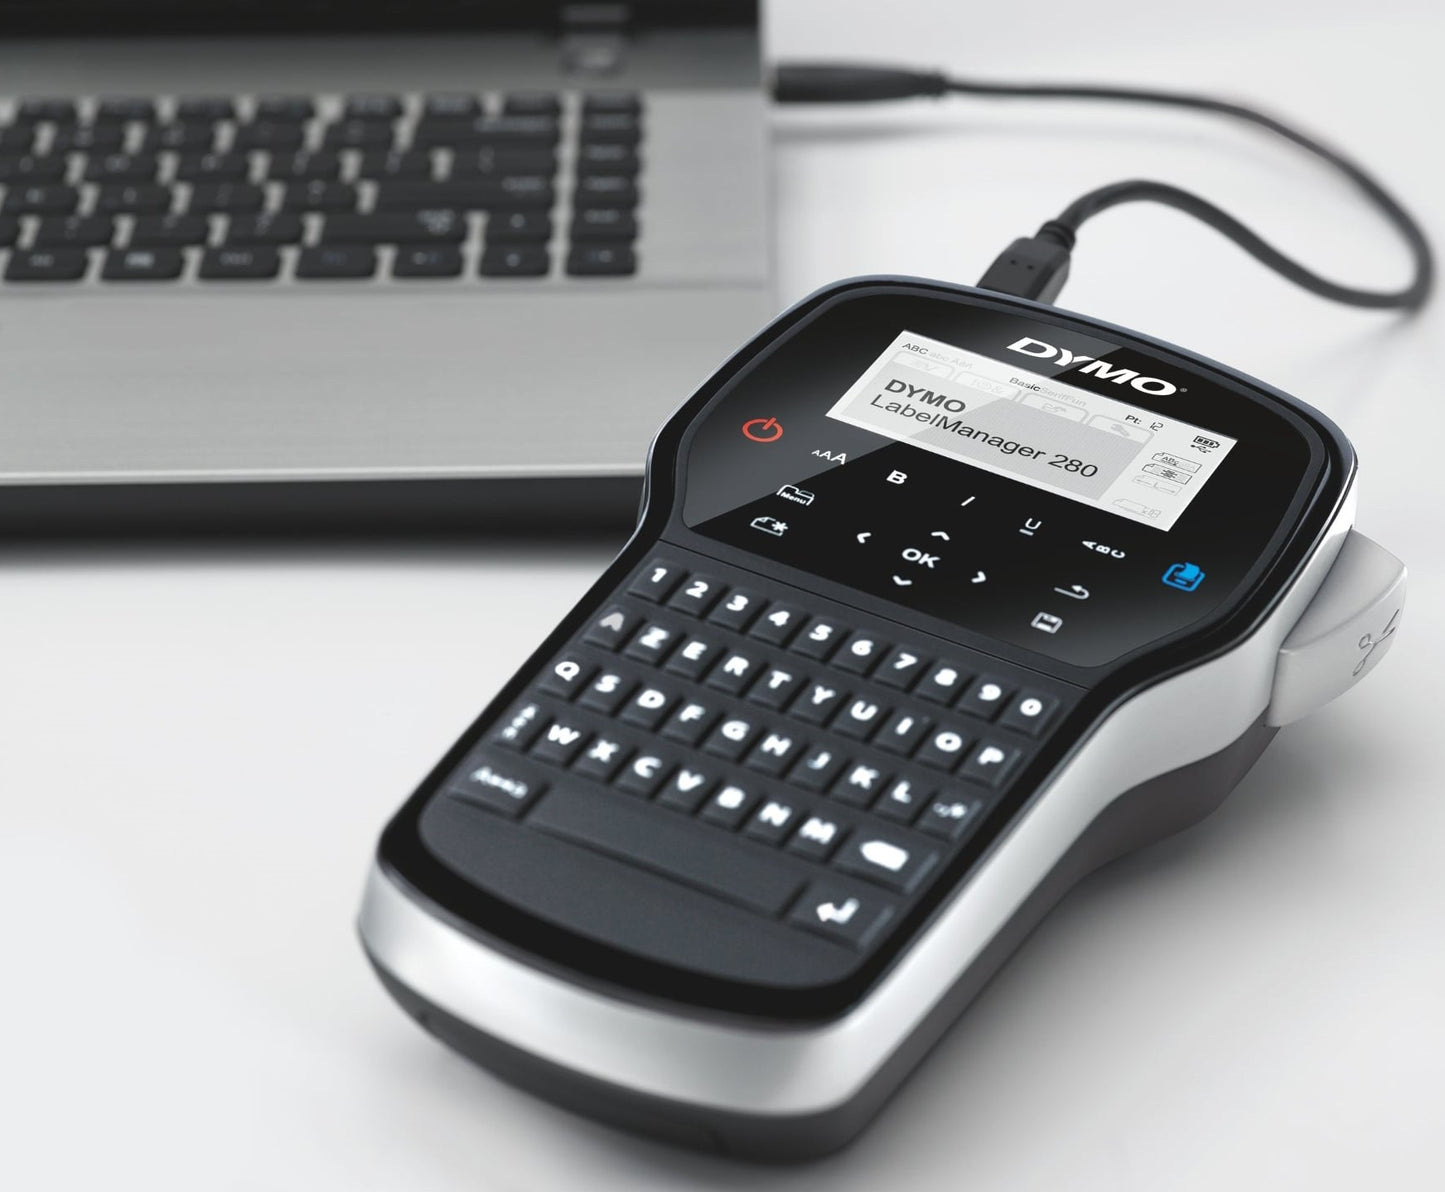 DYMO LabelManager 280 Rechargeable Portable Label Maker Printer with Graphical Display One-touch Fast-formatting Keys